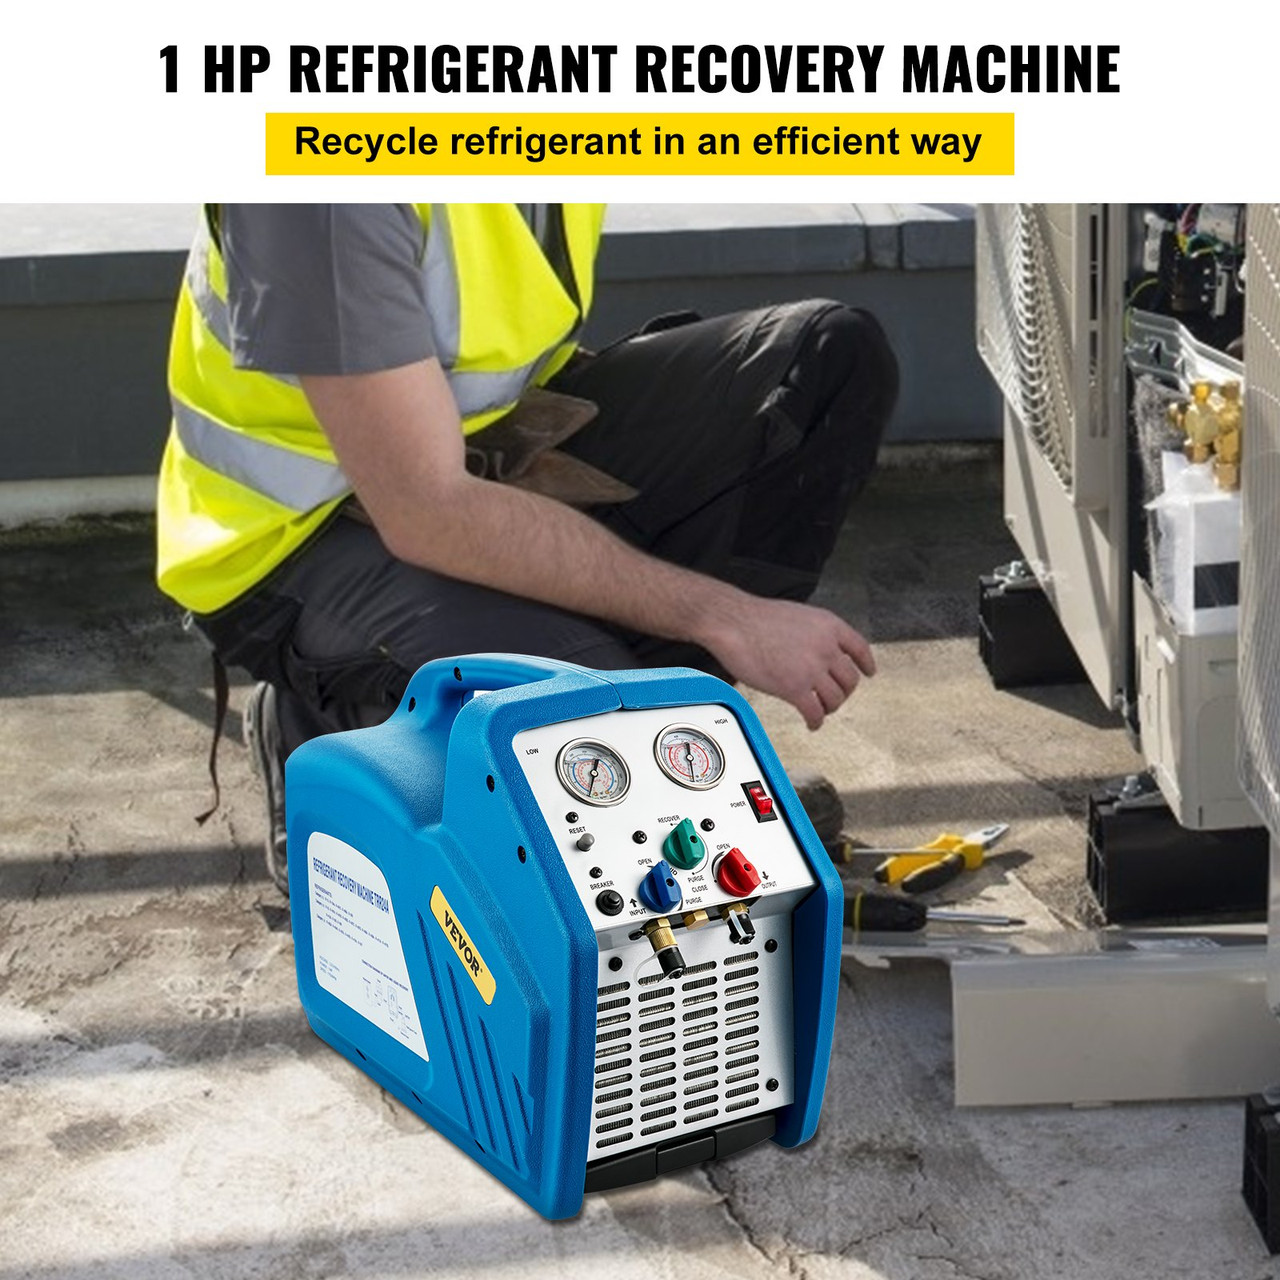 Refrigerant Recovery Machine, 115V 60Hz Portable Freon Recycle Unit for Automotive A/C Systems, 1HP Dual Cylinder for Both Liquid and Vapor Refrigerant, Air Condition Blue